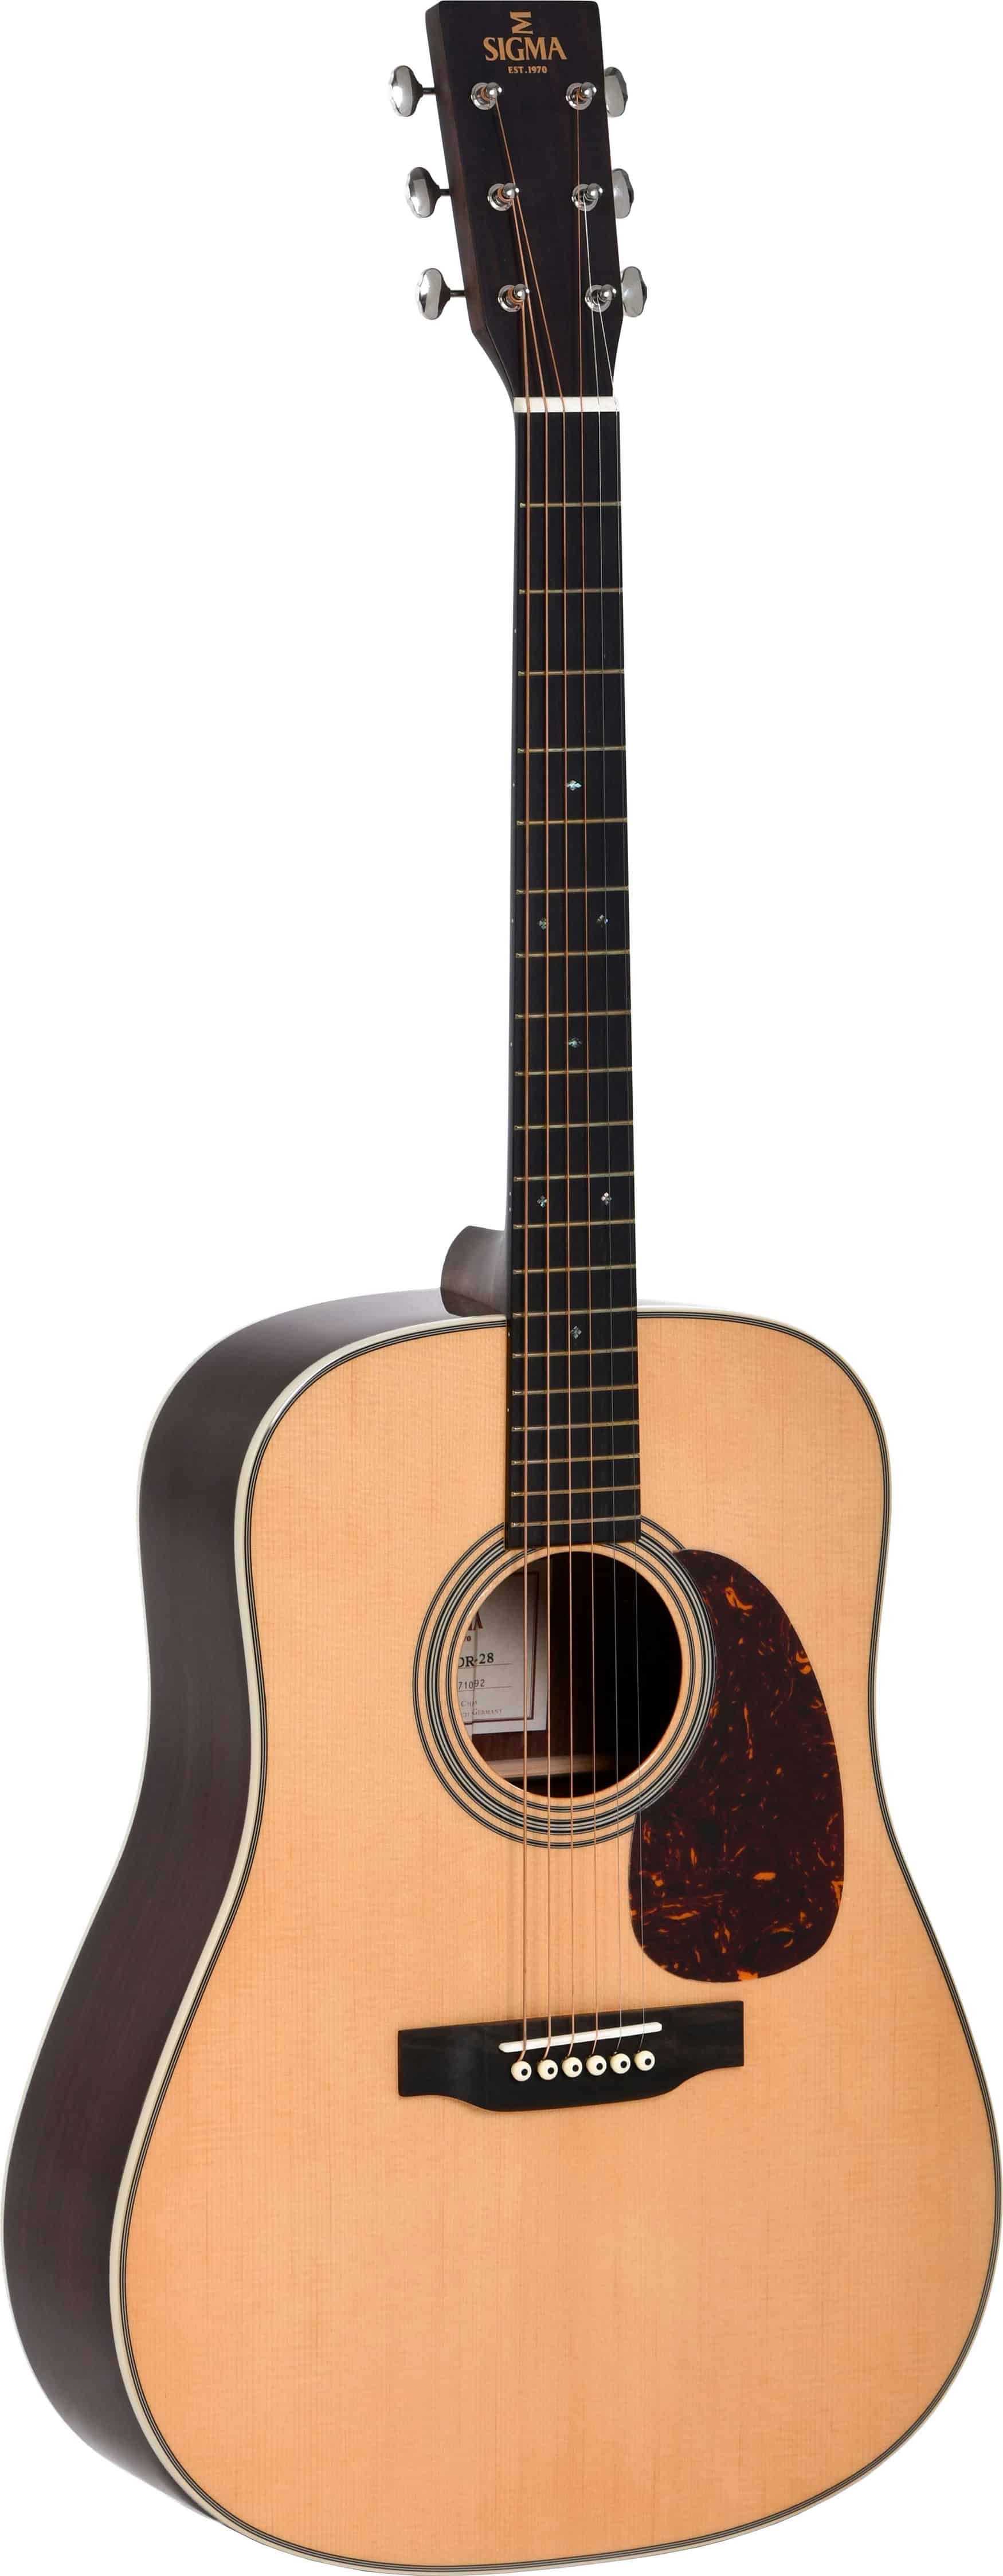 An image of Sigma SDR-28 Acoustic Guitar | PMT Online